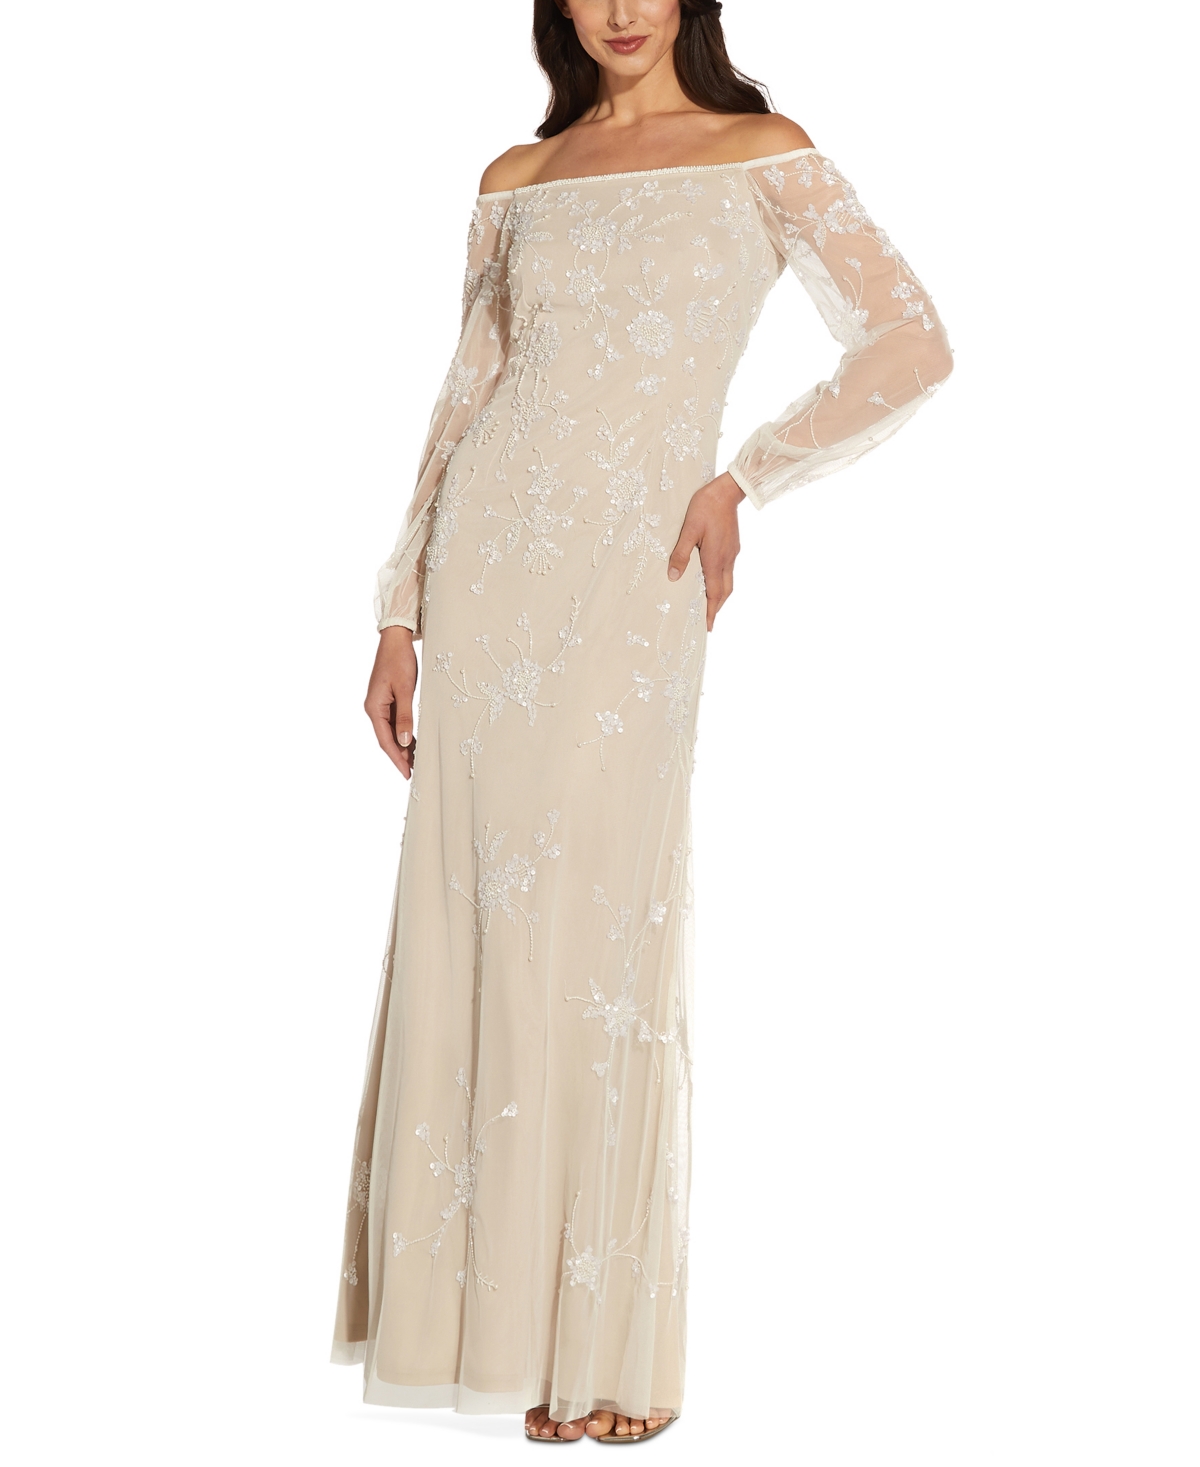 Adrianna Papell Women's Embellished Off-The-Shoulder Gown